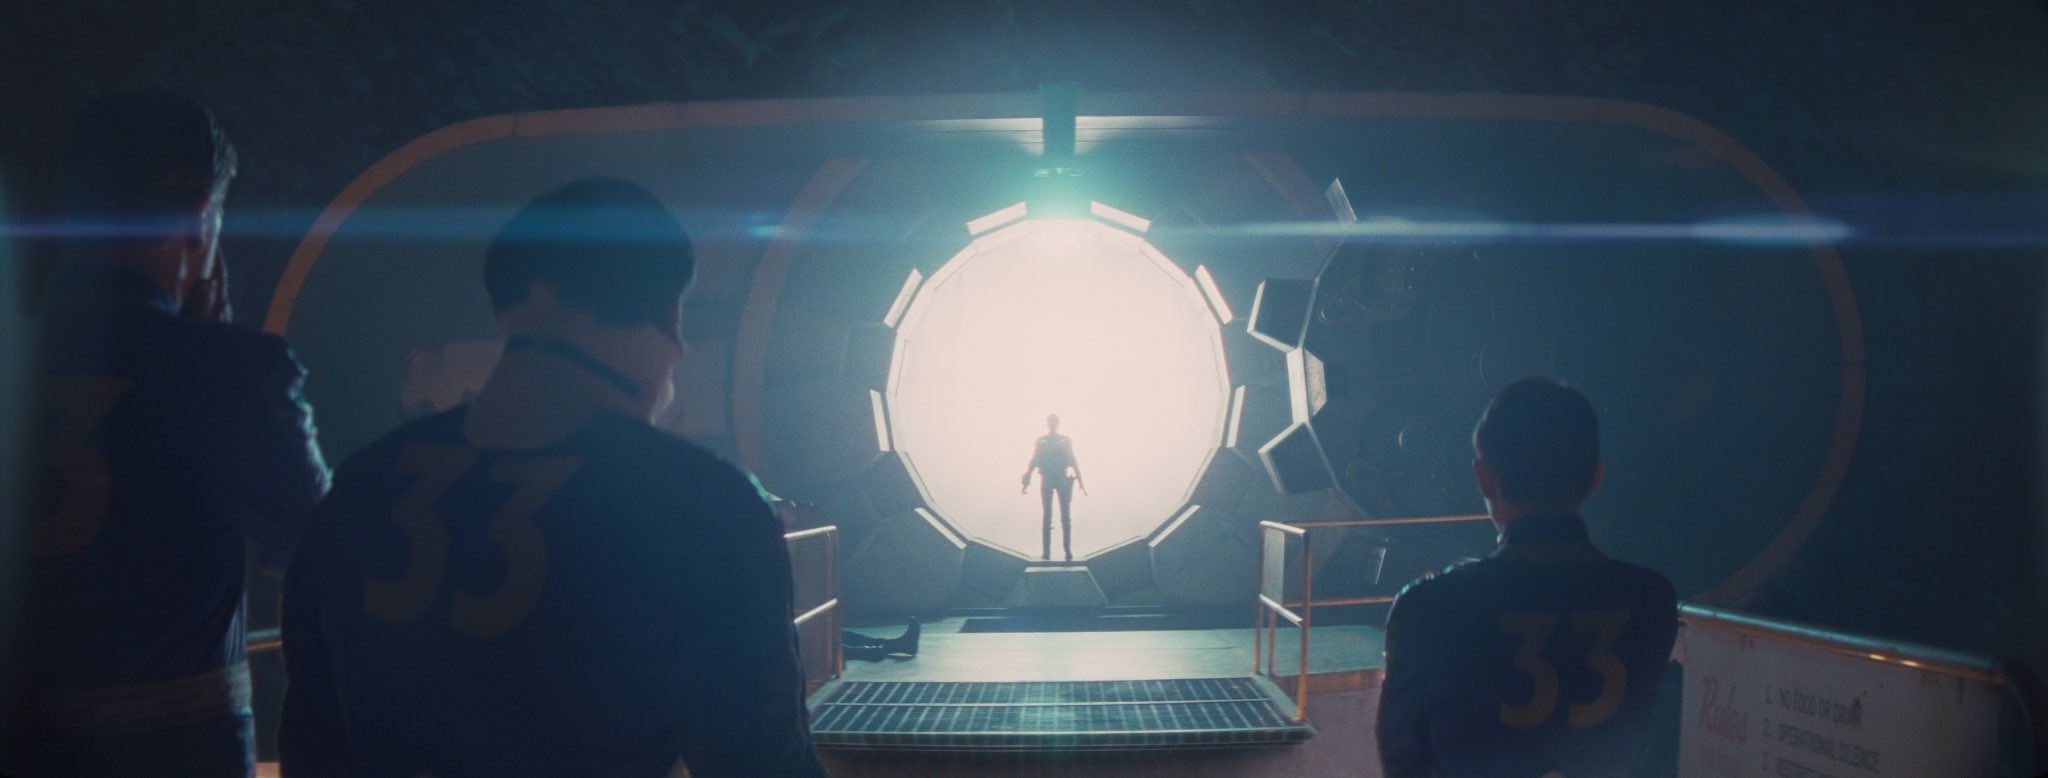 A silhouette stands in front of the blinding white light flooding into an underground shelter from the open vault door of Vault 33 while three people in denim jumpsuits with 33 on the back look on.